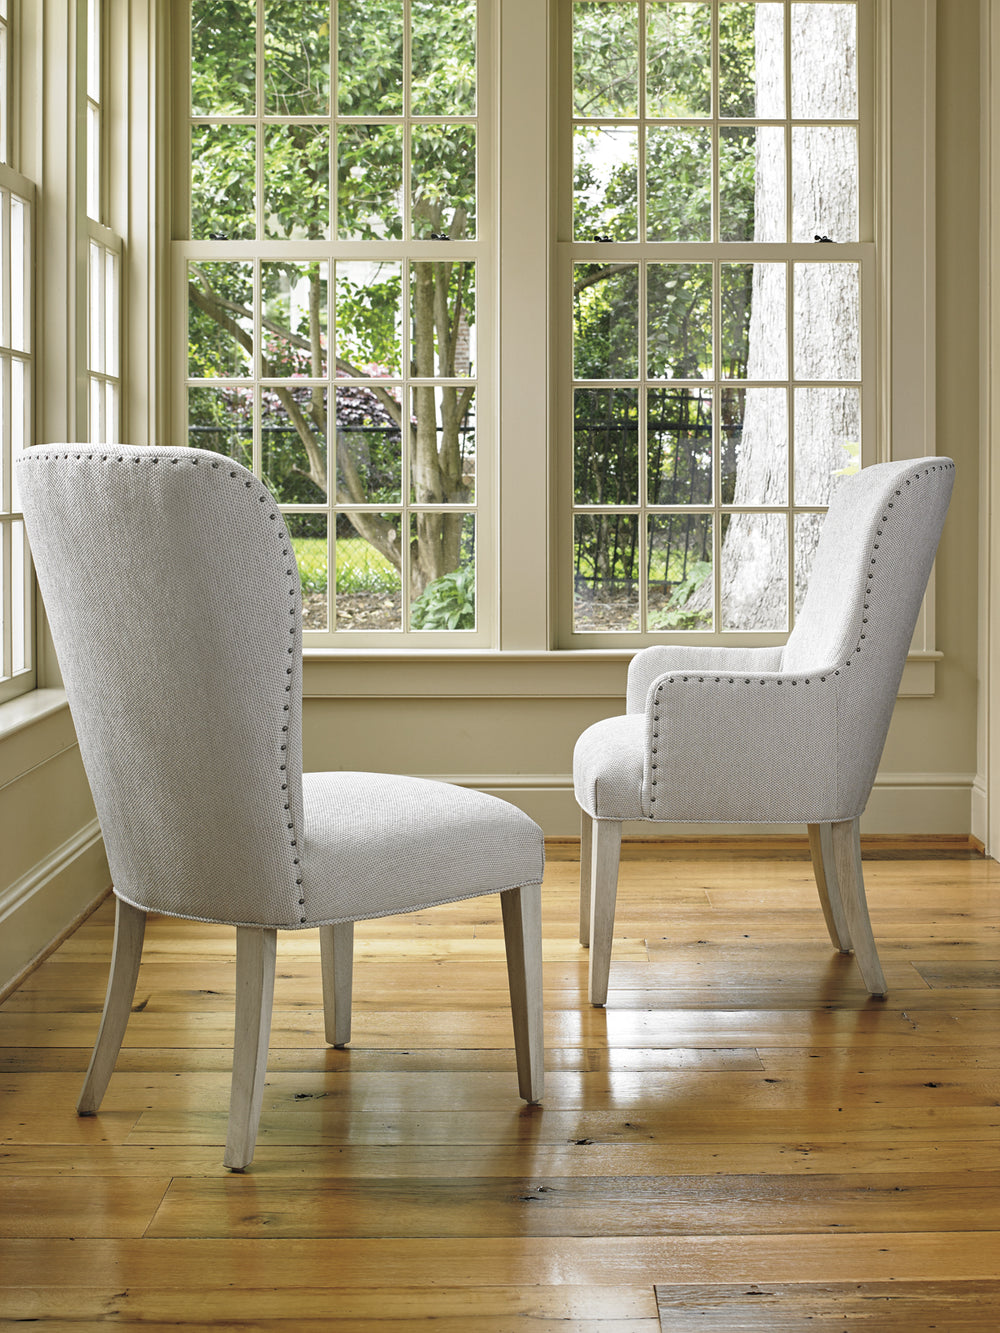 American Home Furniture | Lexington  - Oyster Bay Baxter Upholstered Side Chair